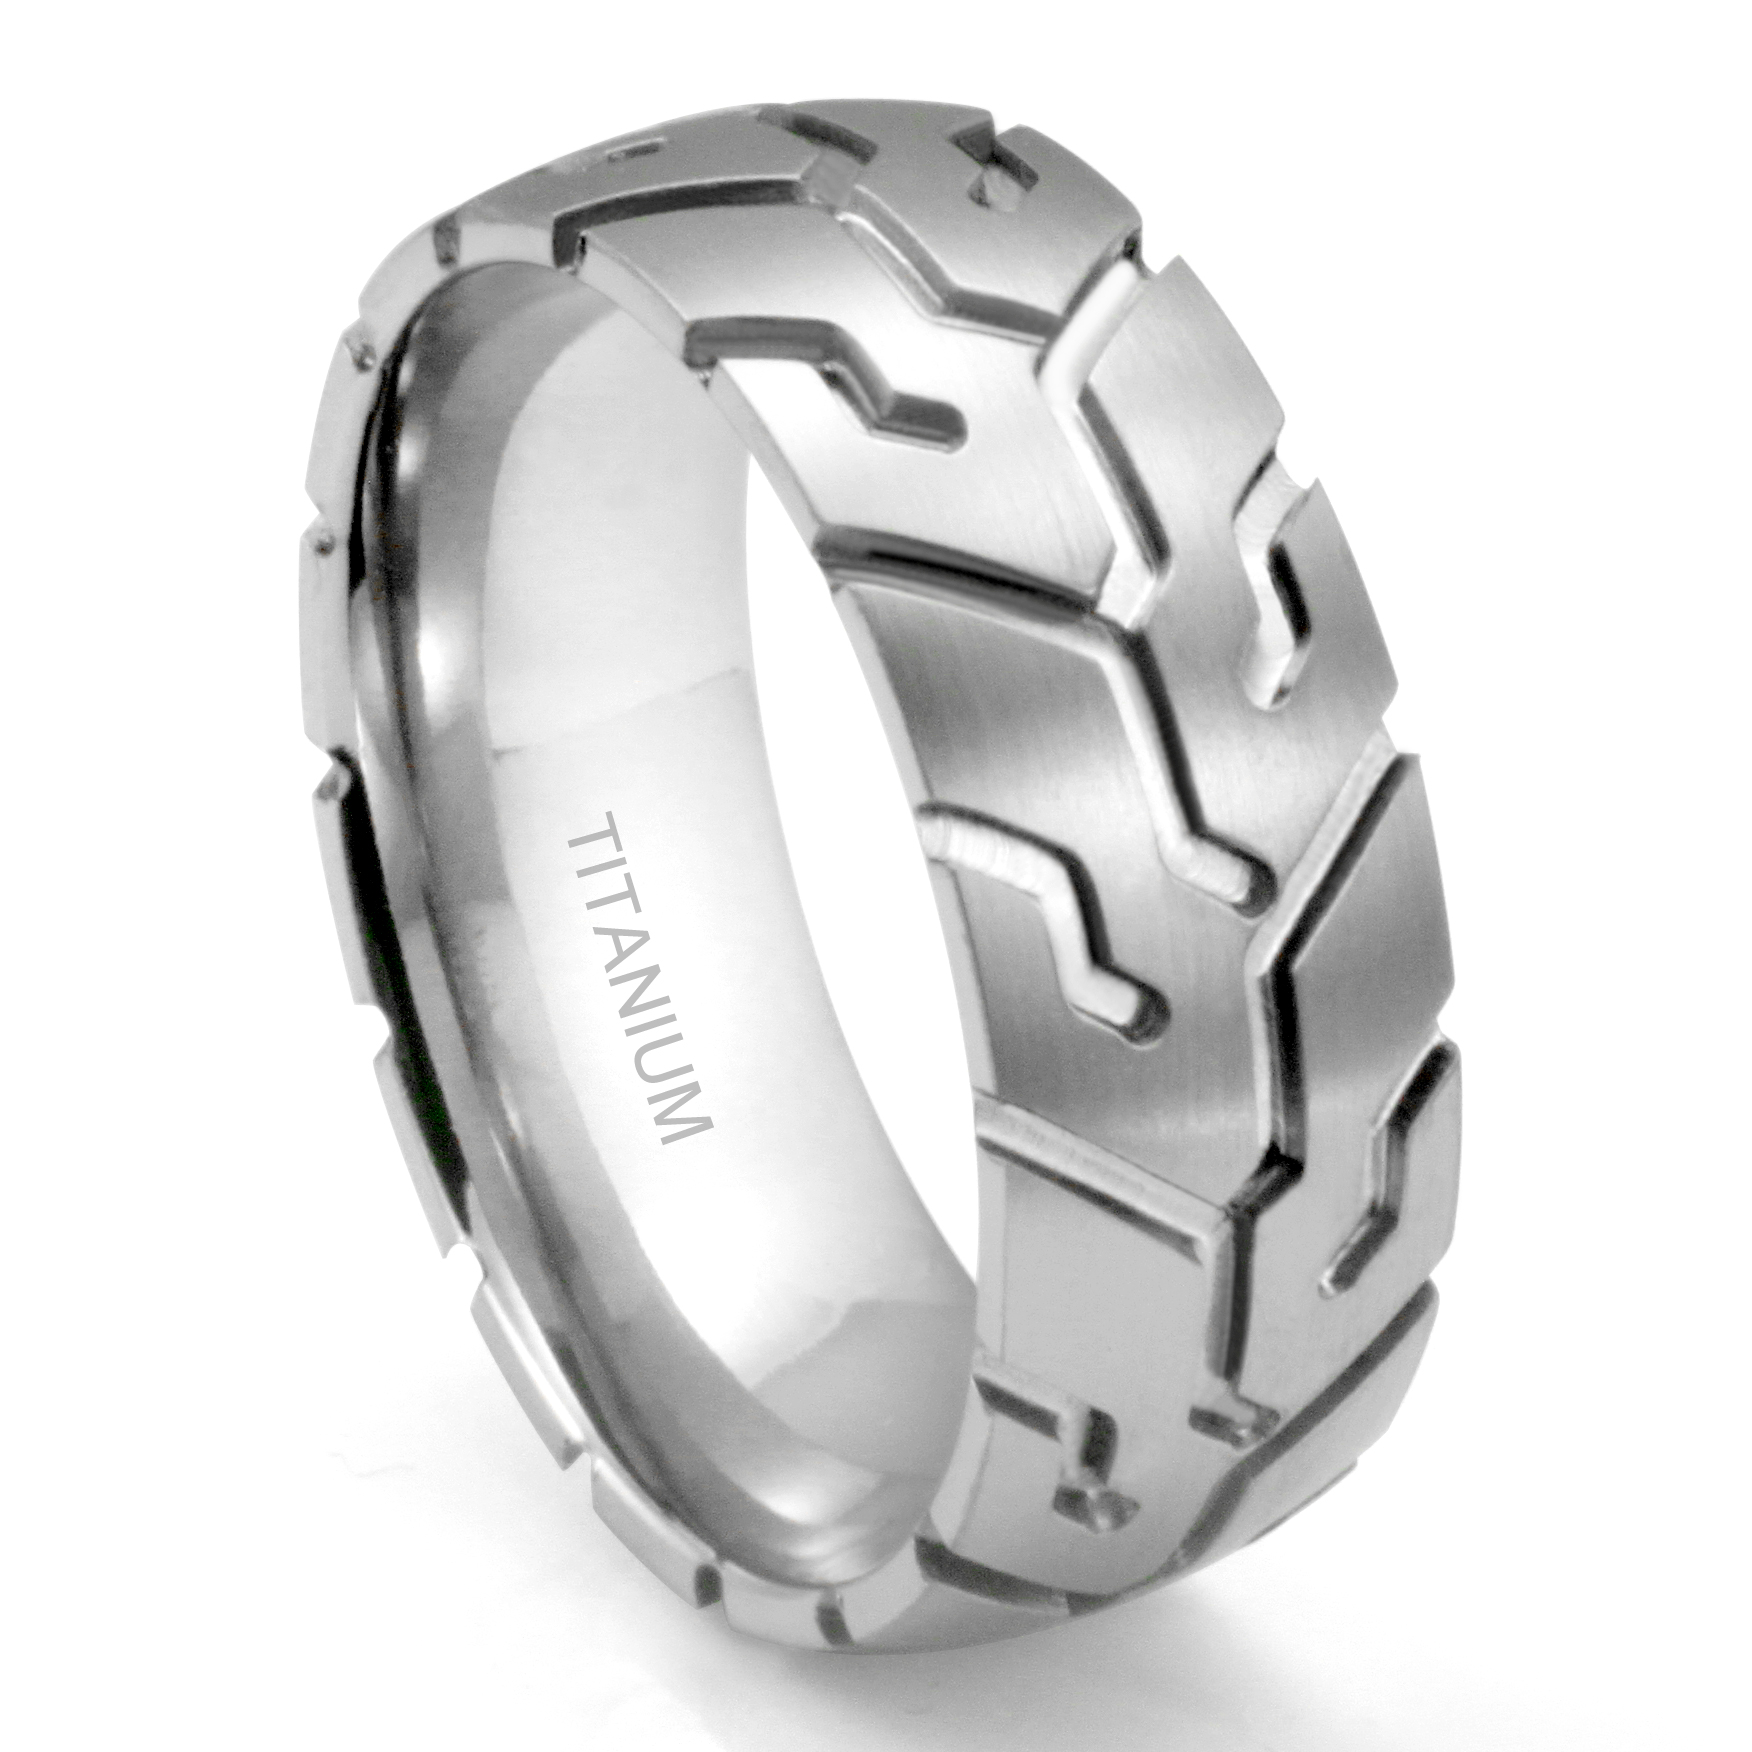 Mens Mechanic Car Racer Tire Tread Band Ring for Men for Bikers Matte Brushed Silver Tone Stainless Steel 8MM